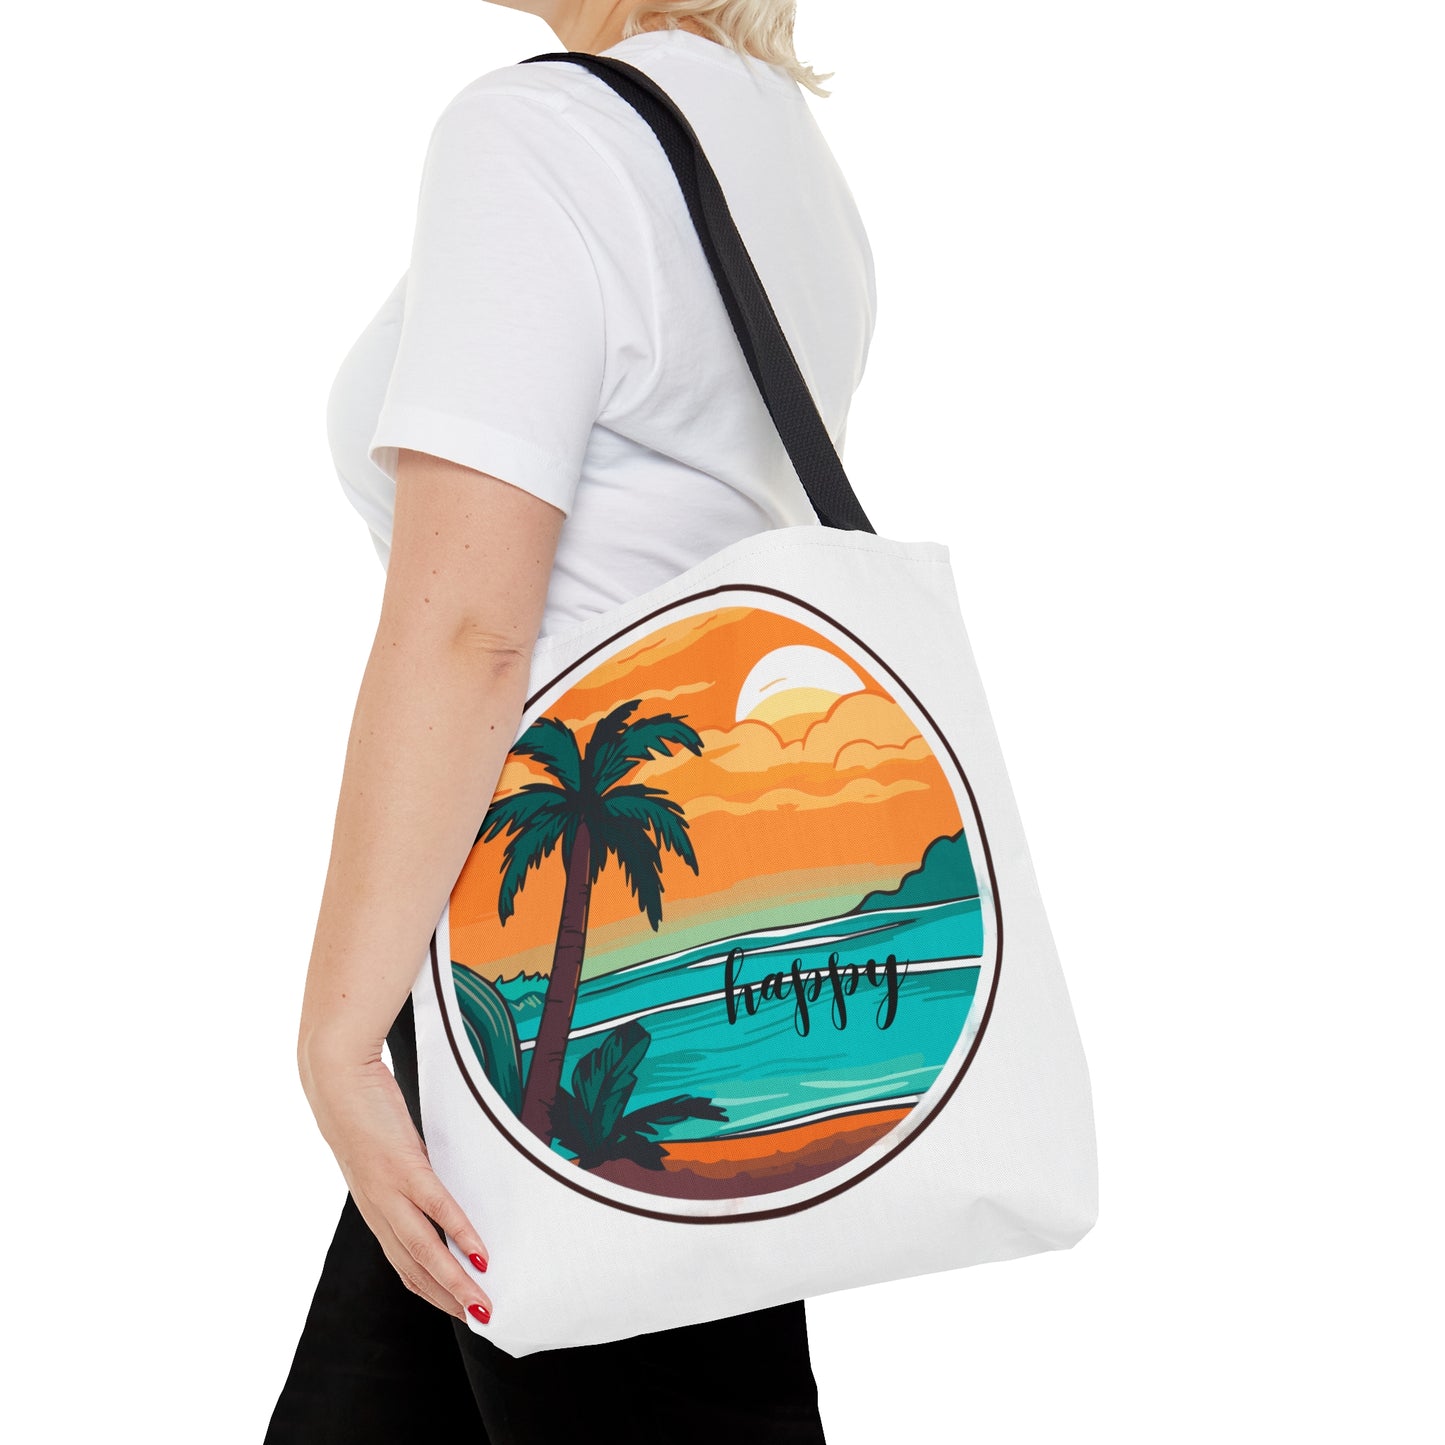 Is the beach your happy place? If so, then this Tote Bag is for you! Come in 3 sizes to meet your needs.